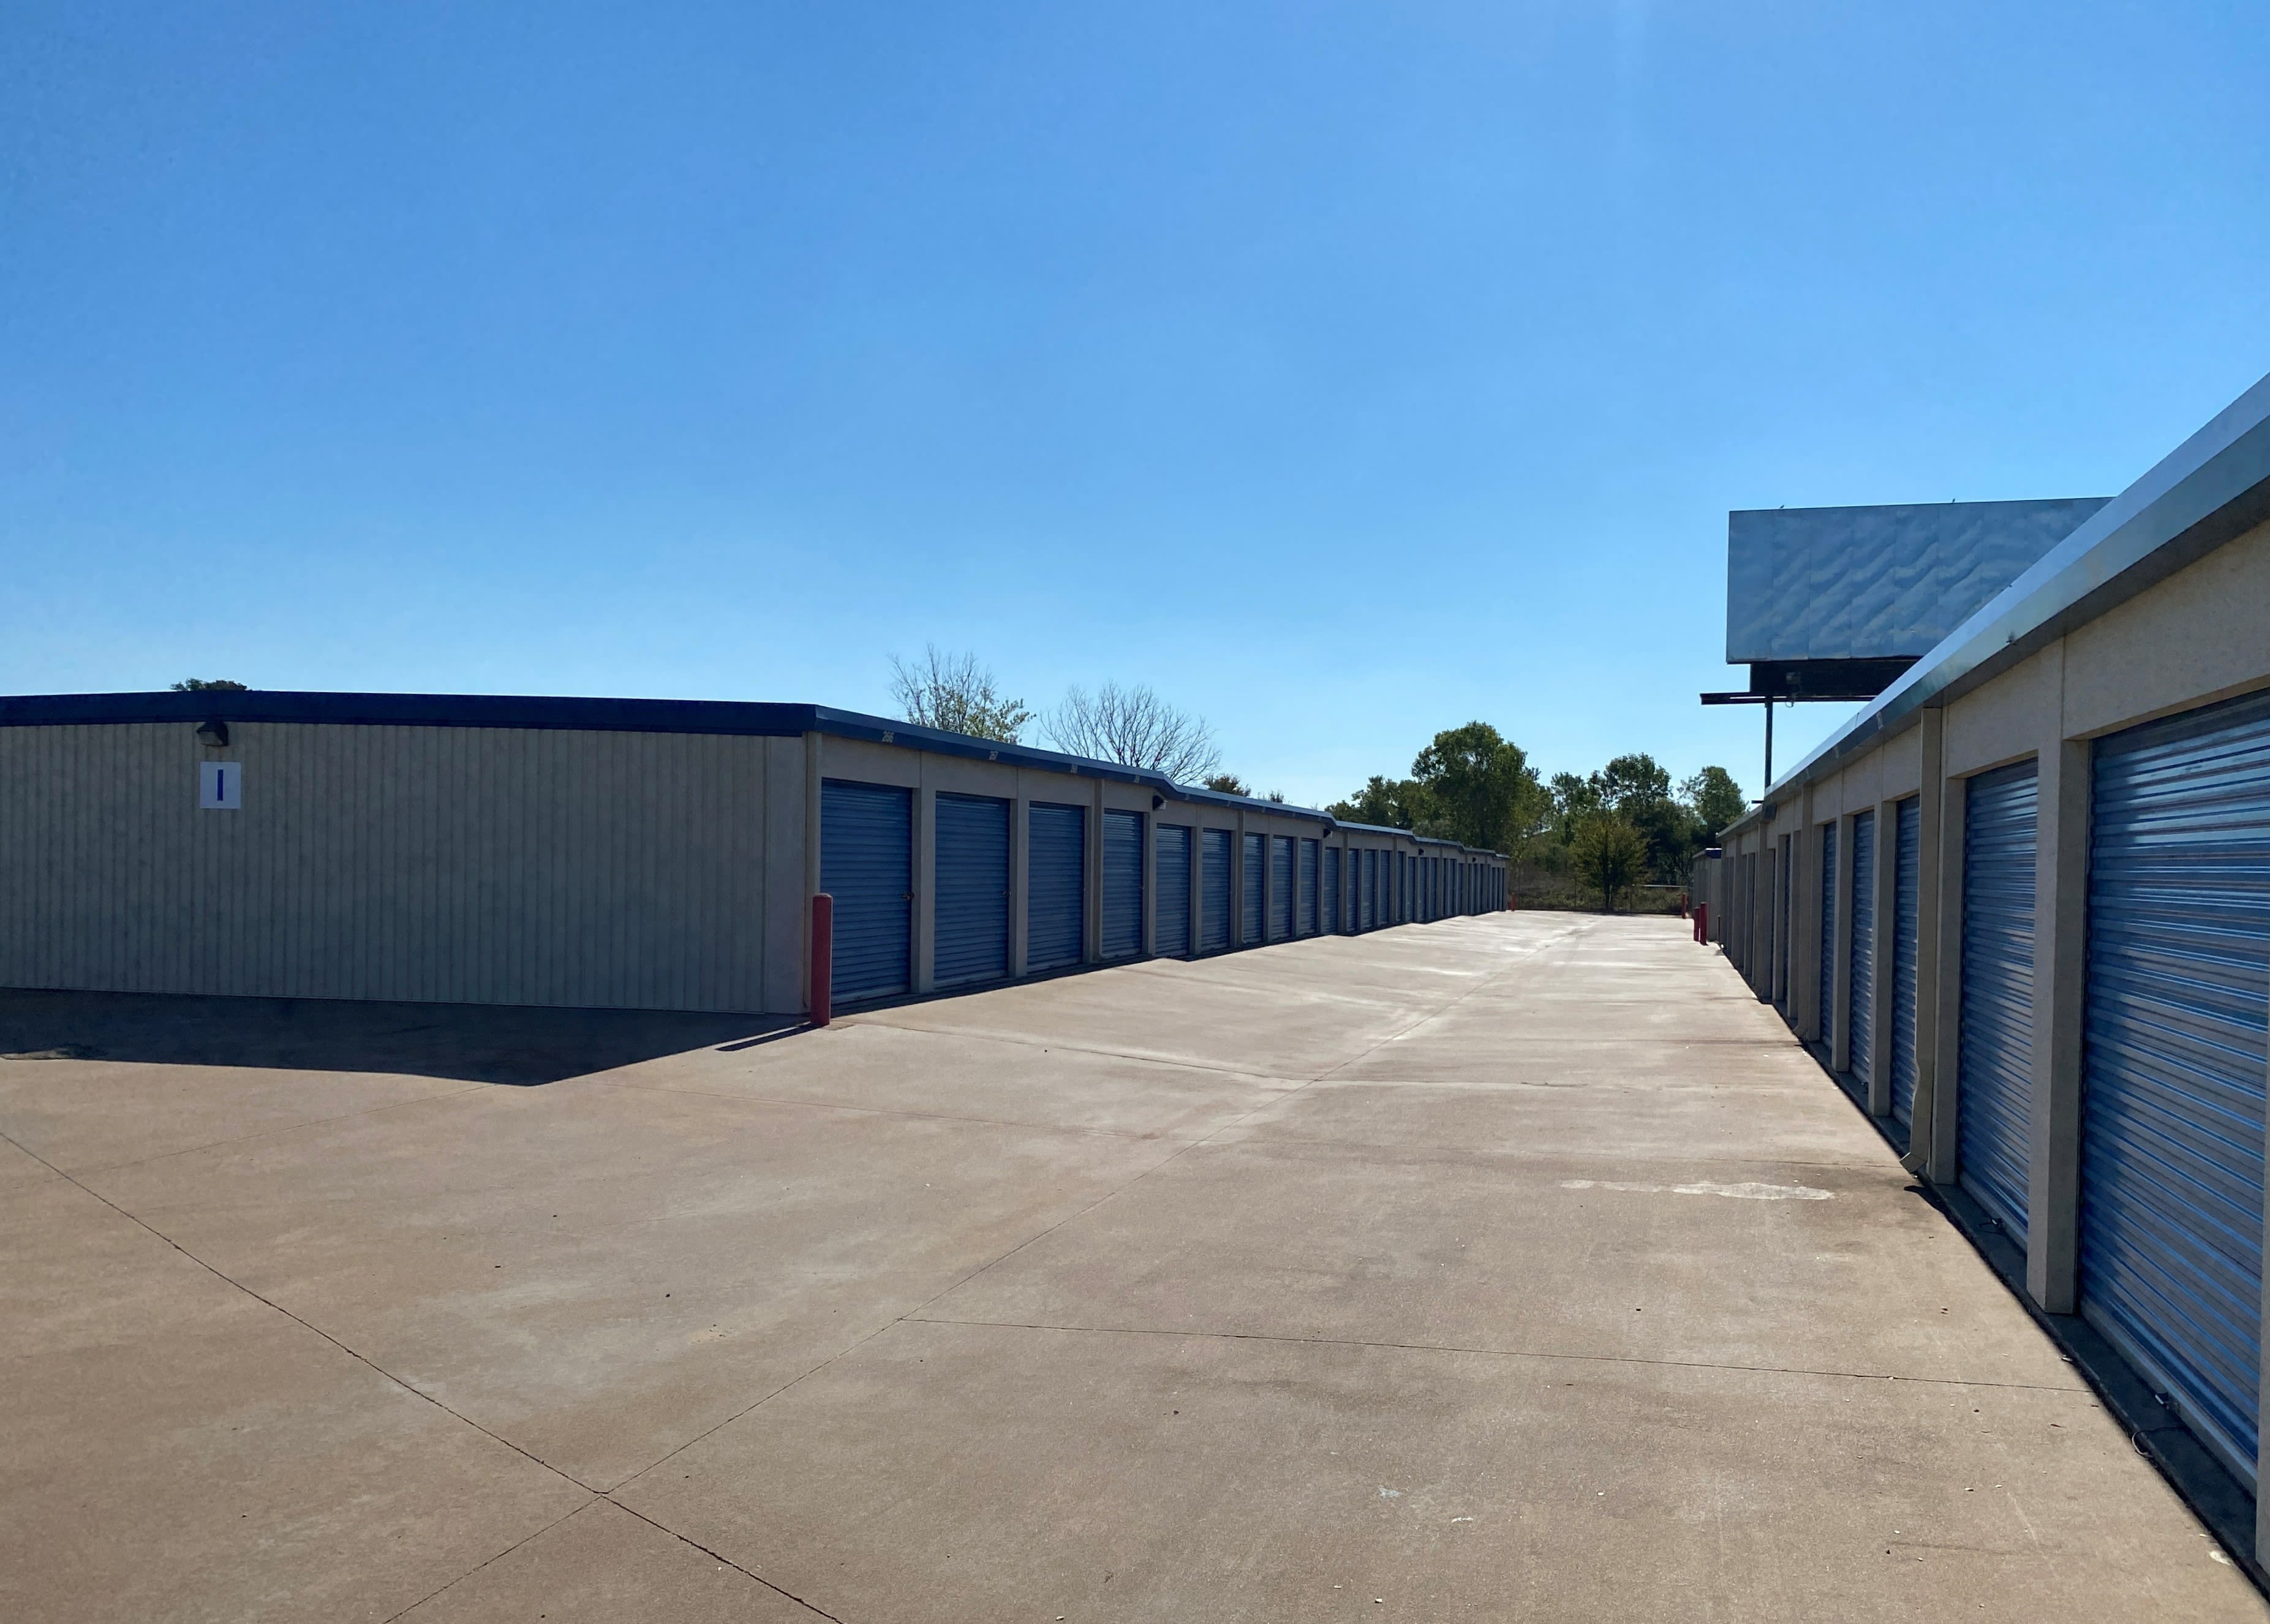 View our hours and directions at KO Storage in Wichita Falls, Texas